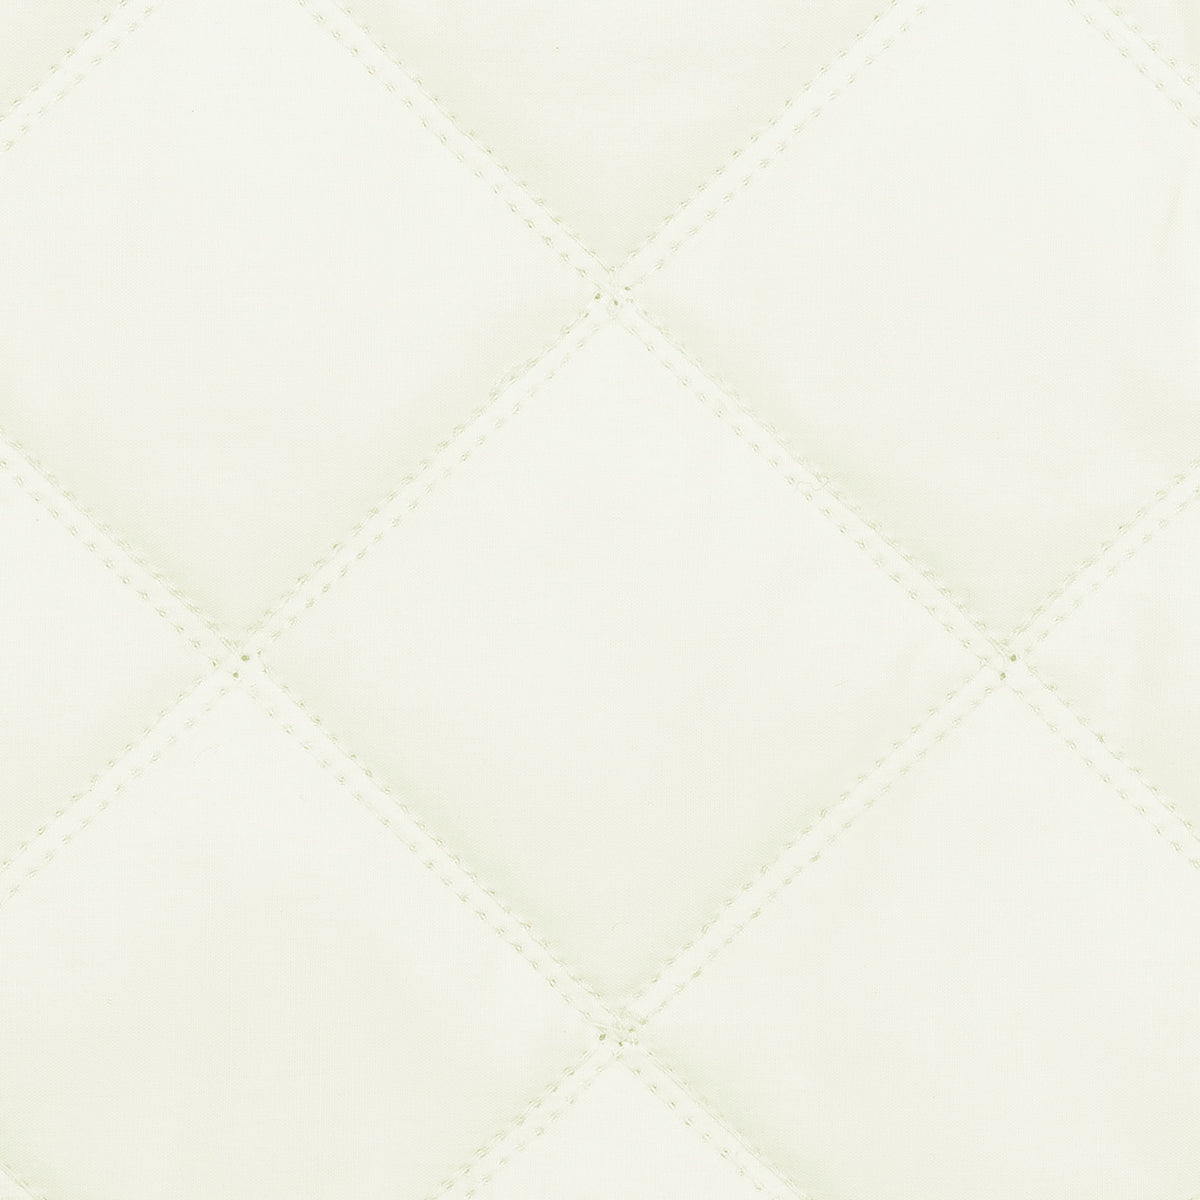 Swatch Sample of Matouk Milano Quilt Bedding in Color Ivory